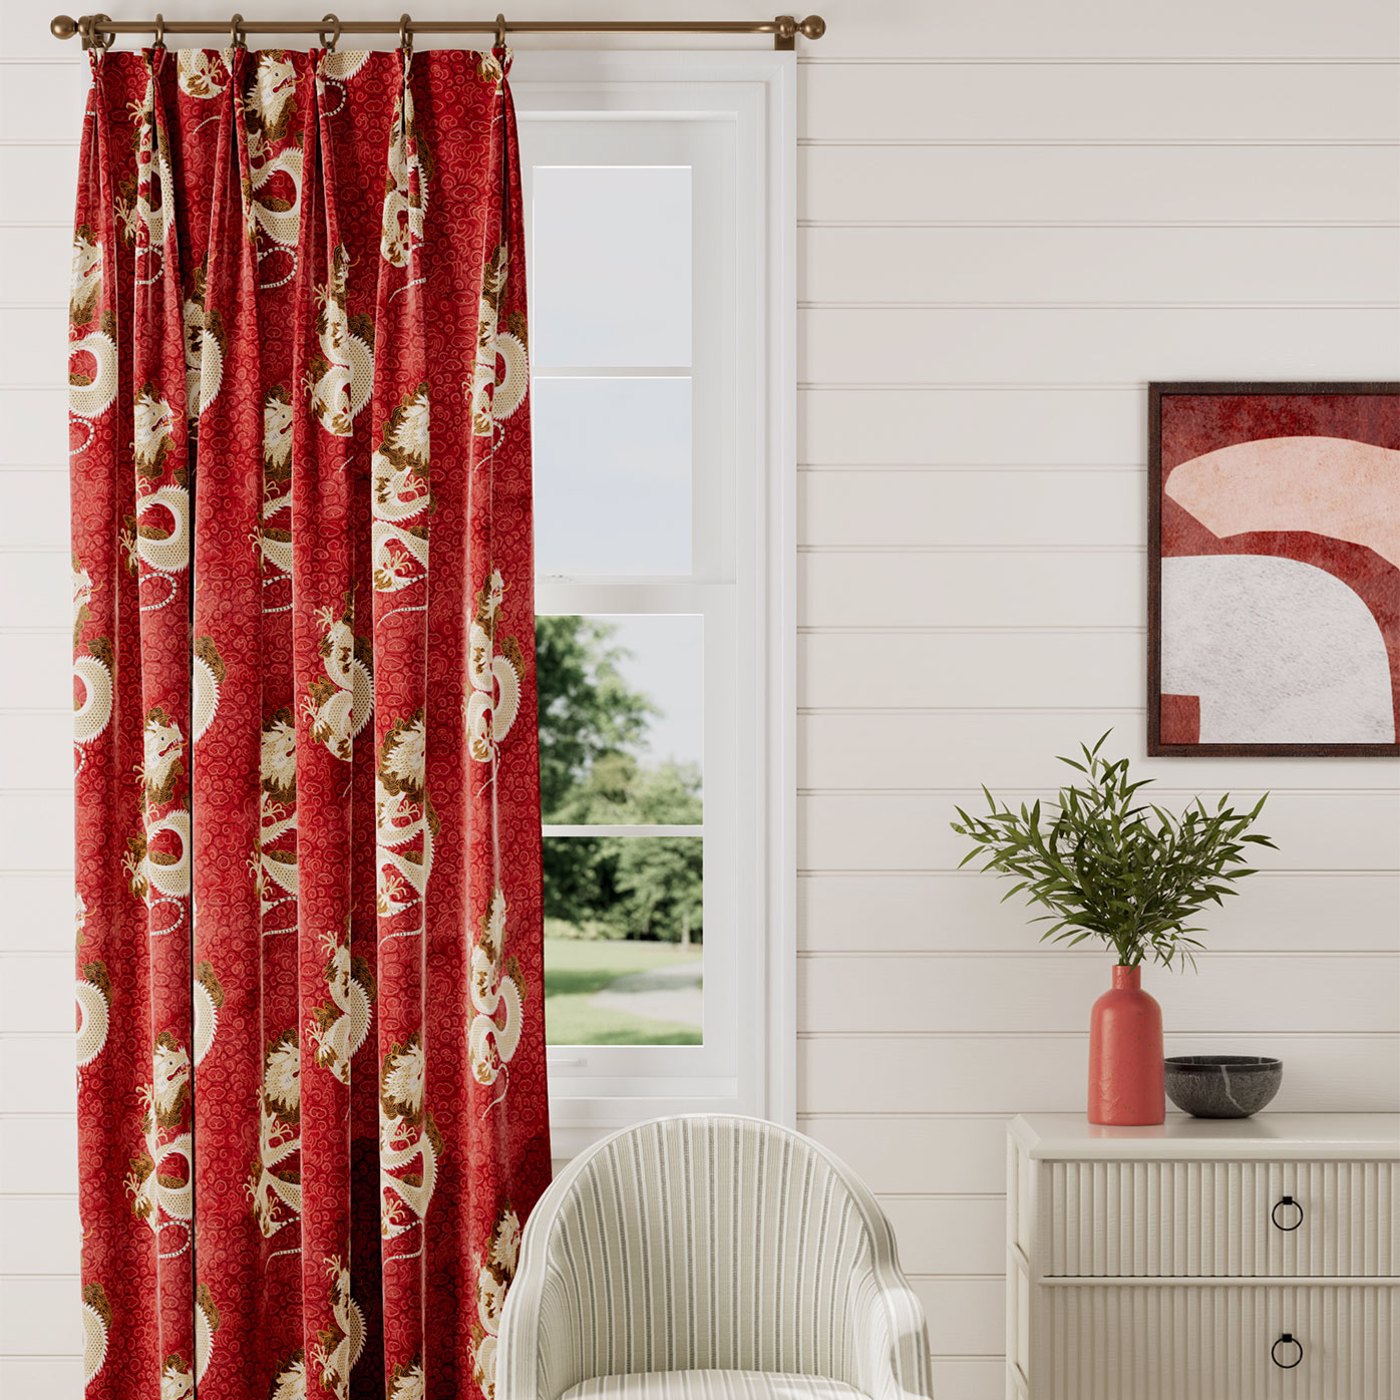 red and patterned curtain in front of a closed window with white walls